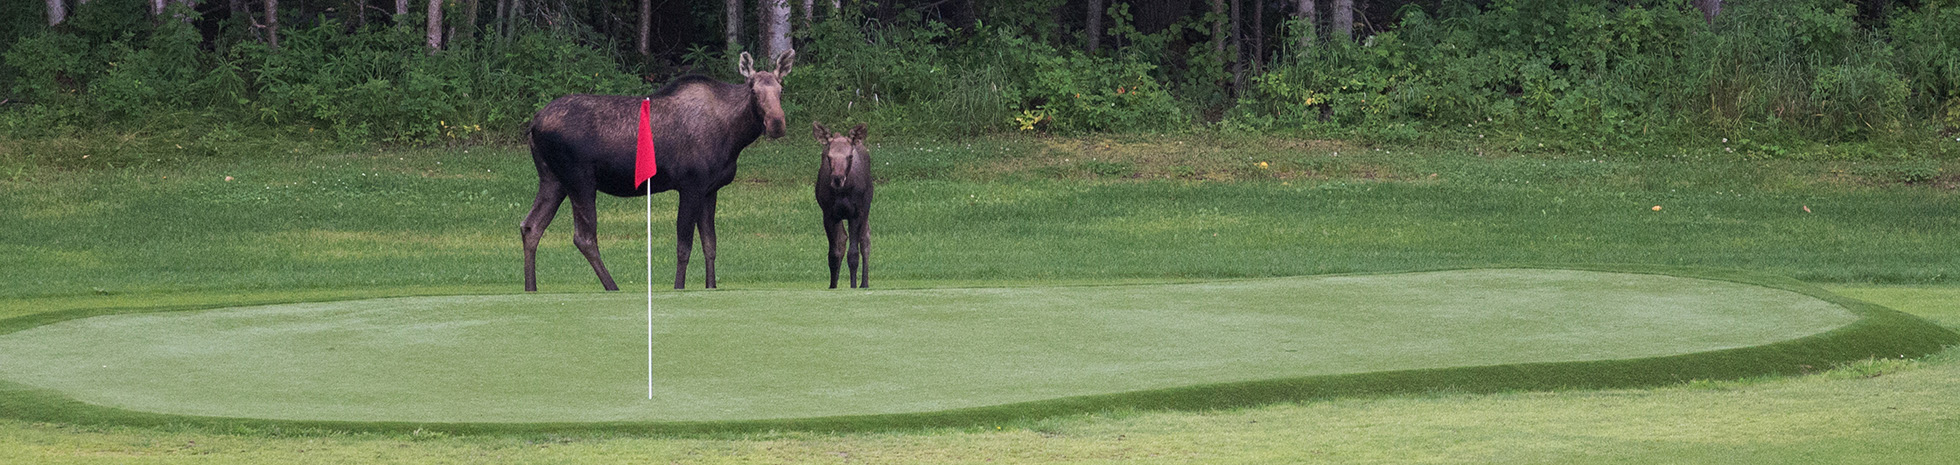 Moose on golf course